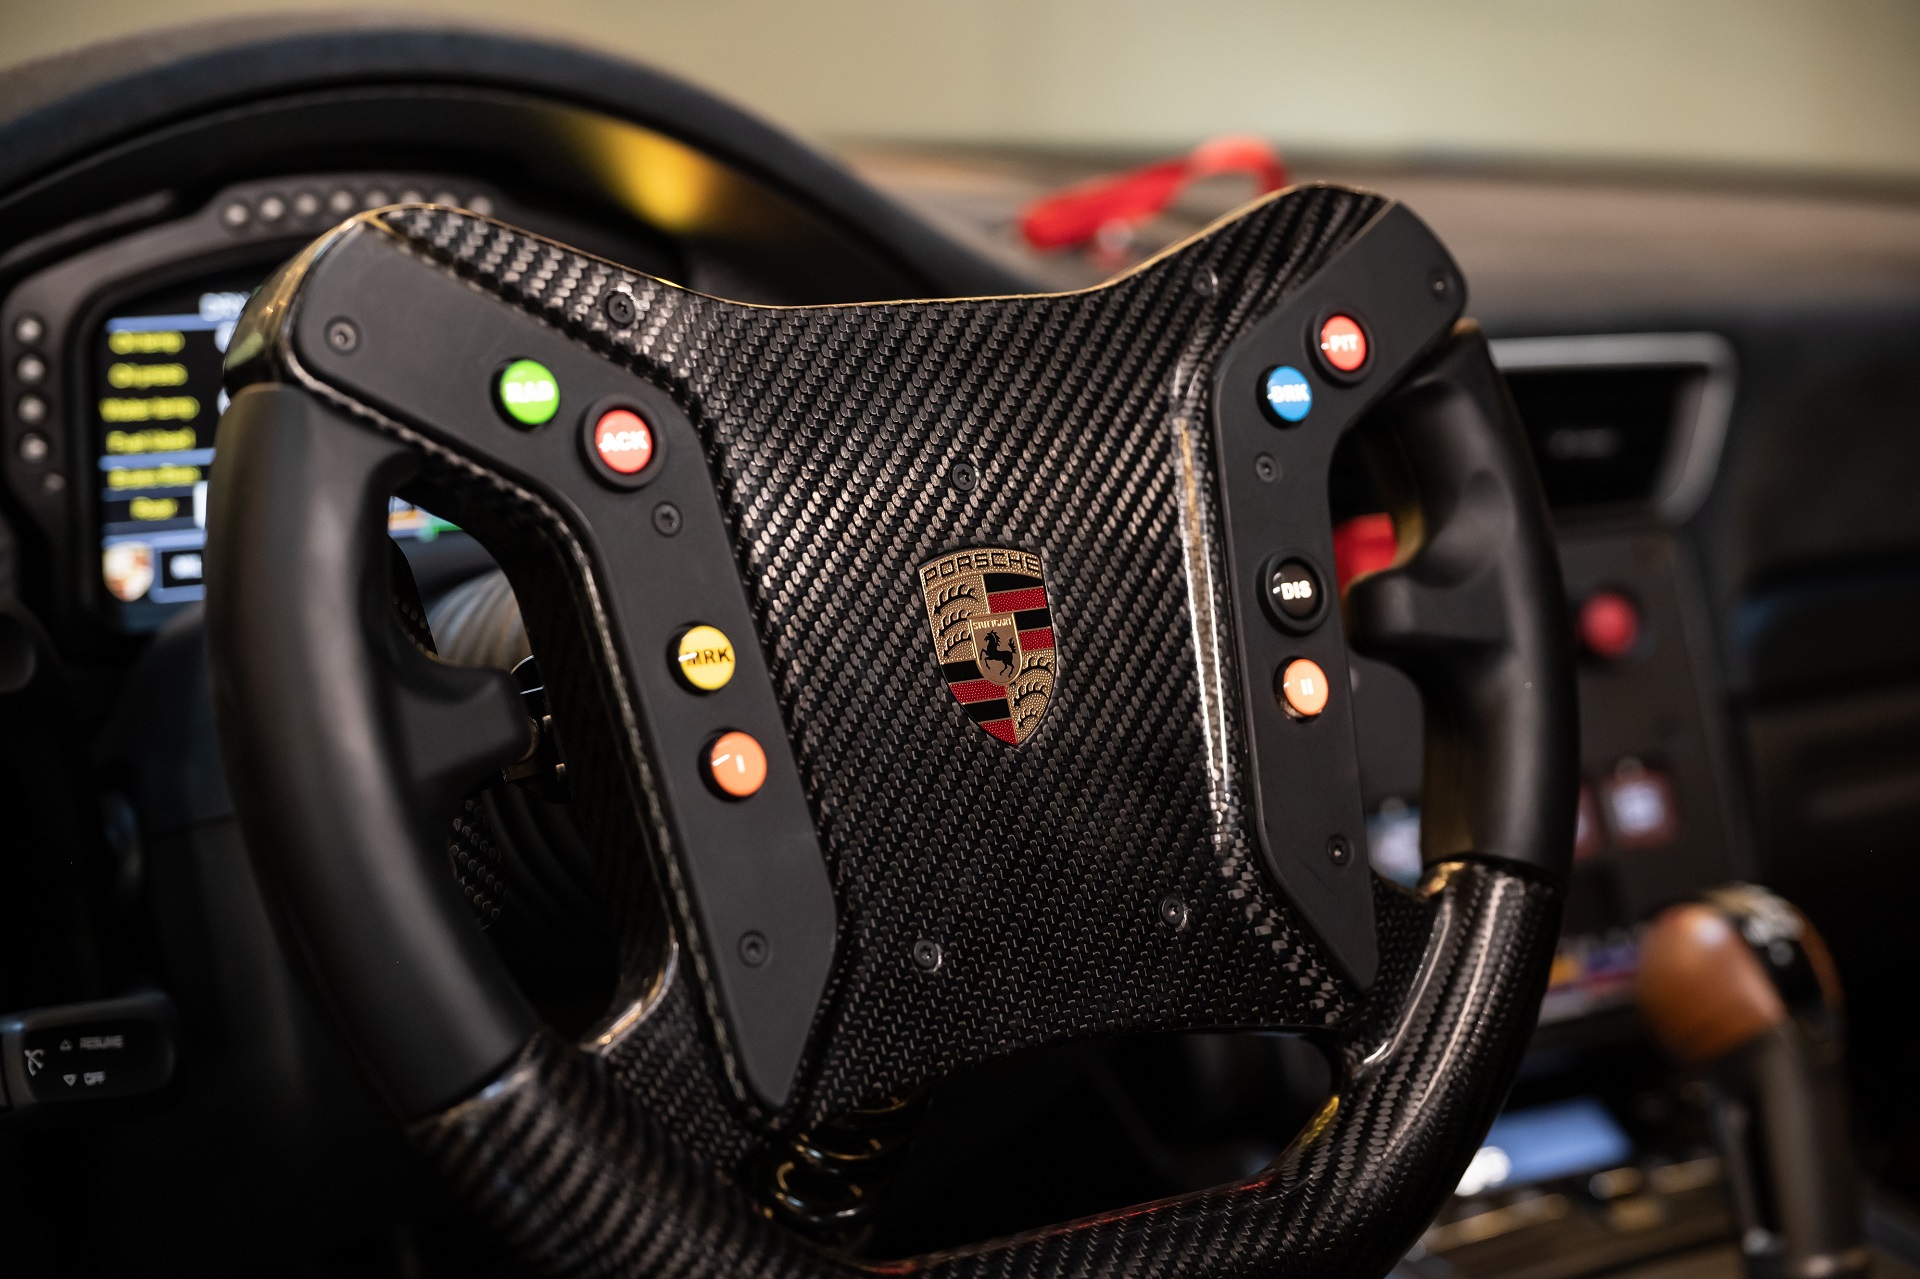 A close-up image of the racing steering wheel of a Gulf-liveried 2019 Porsche 935